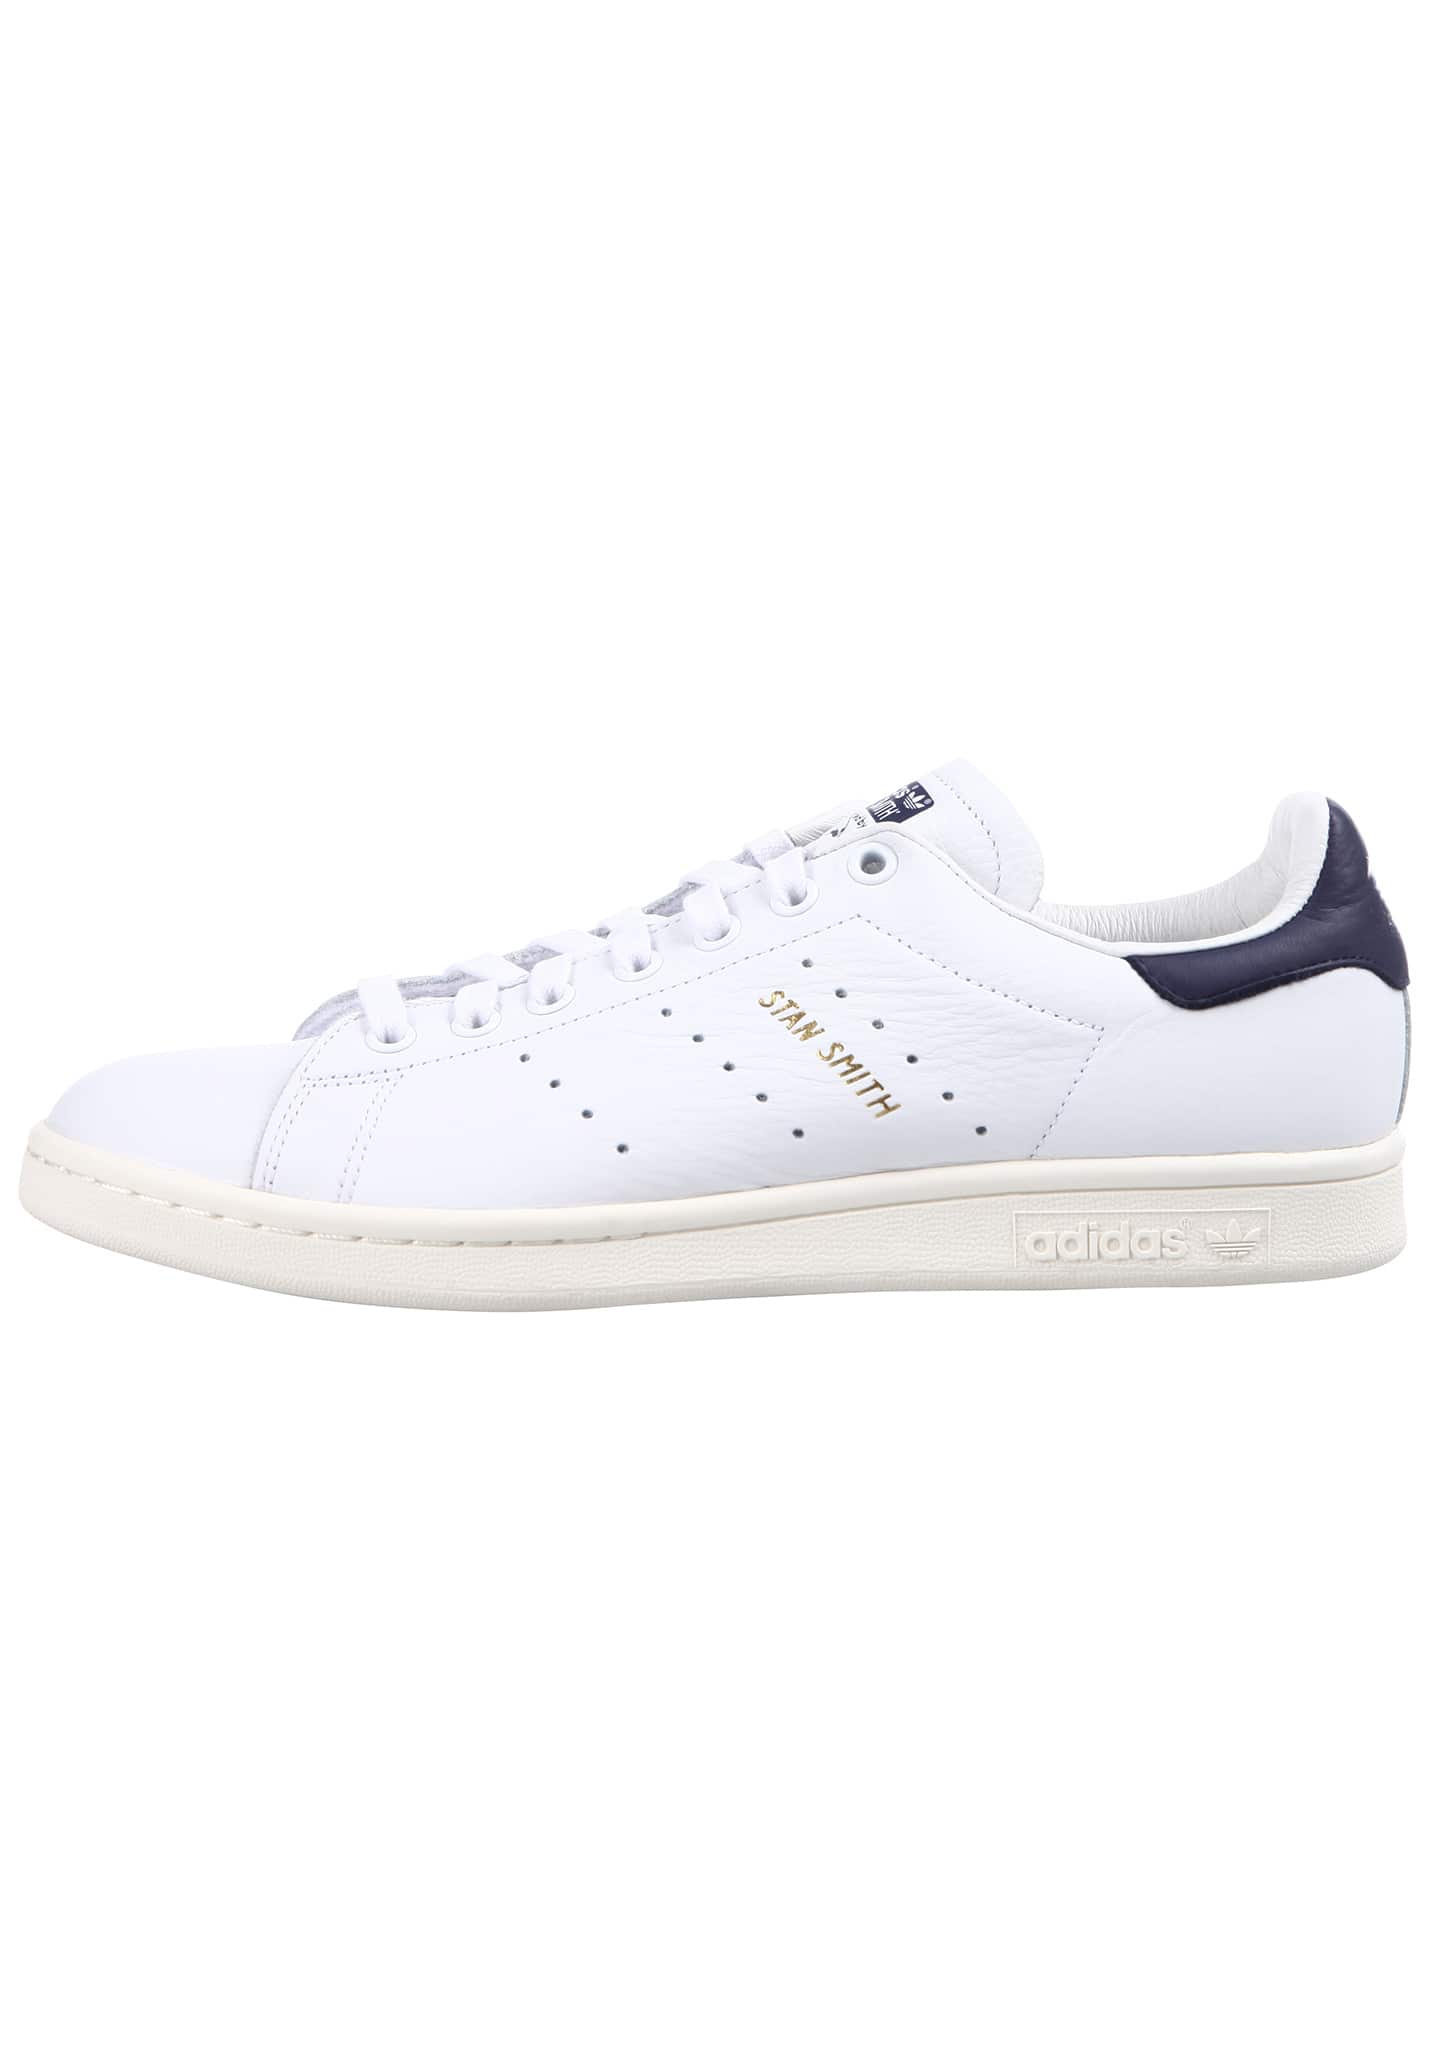 Adidas Originals Stan Smith Sneaker Low ftwr white/ftwr white/noble ink 47 1/3